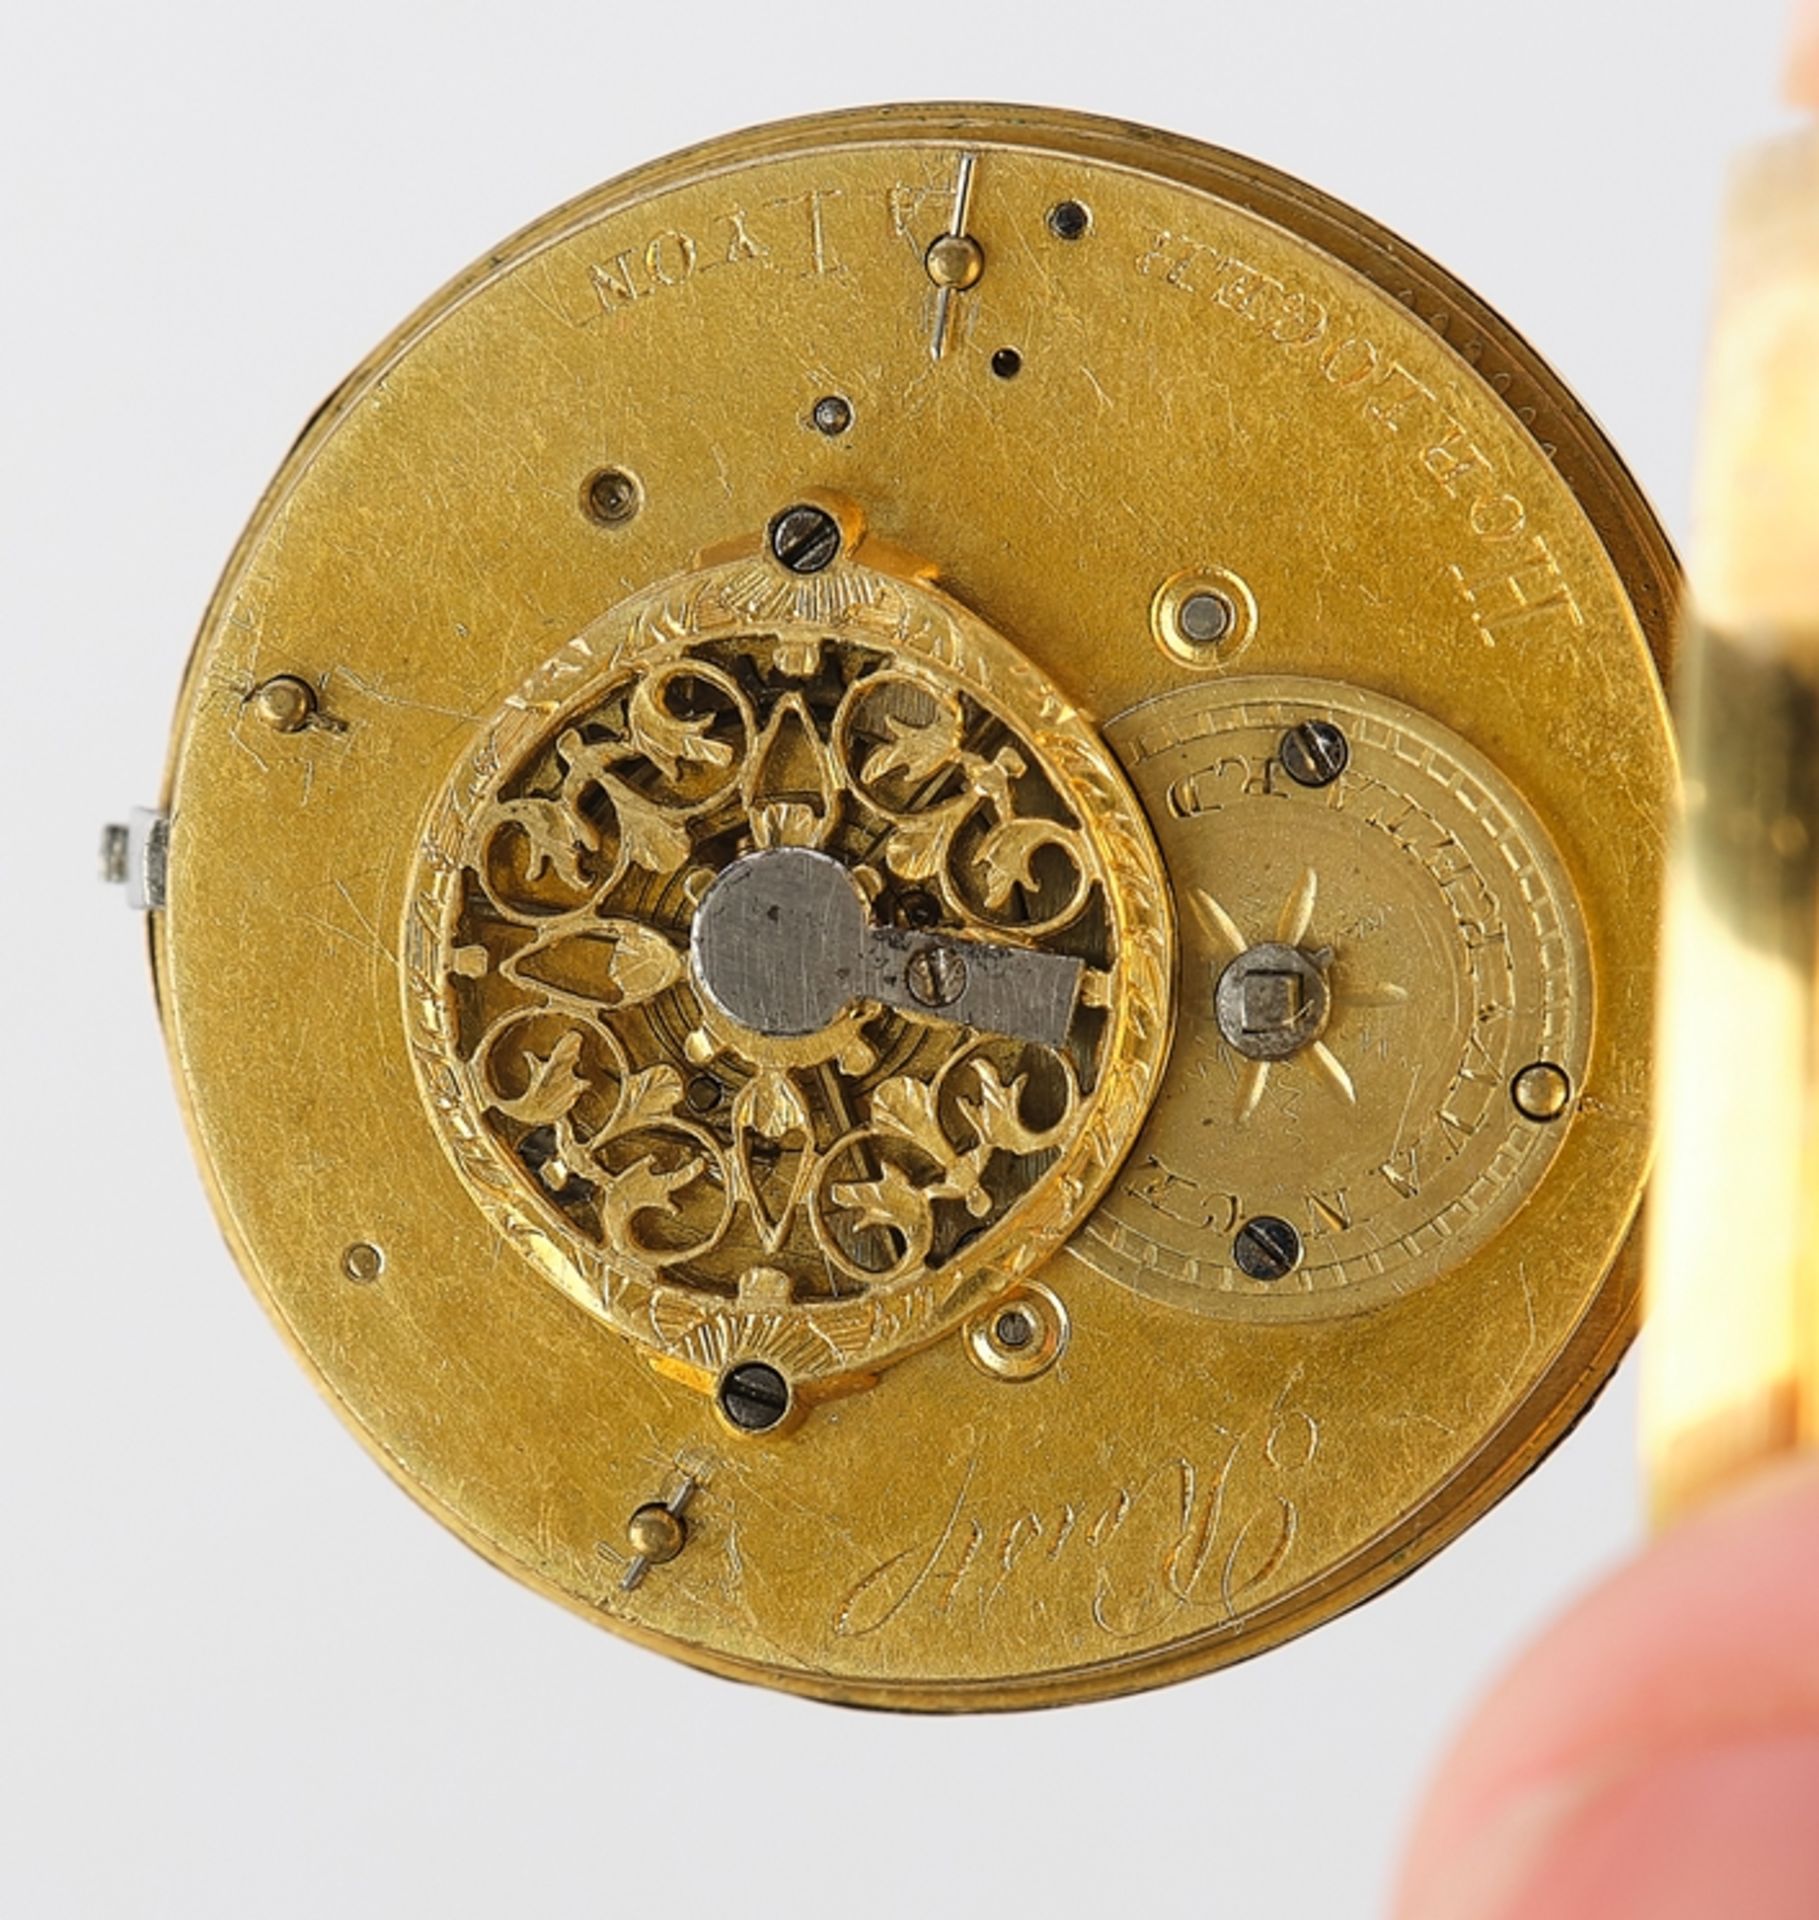 Spindle pocket watch, Lyon / France, circa 1790, signed "Reist / Horloger a Lyon" on the movement,  - Image 3 of 5